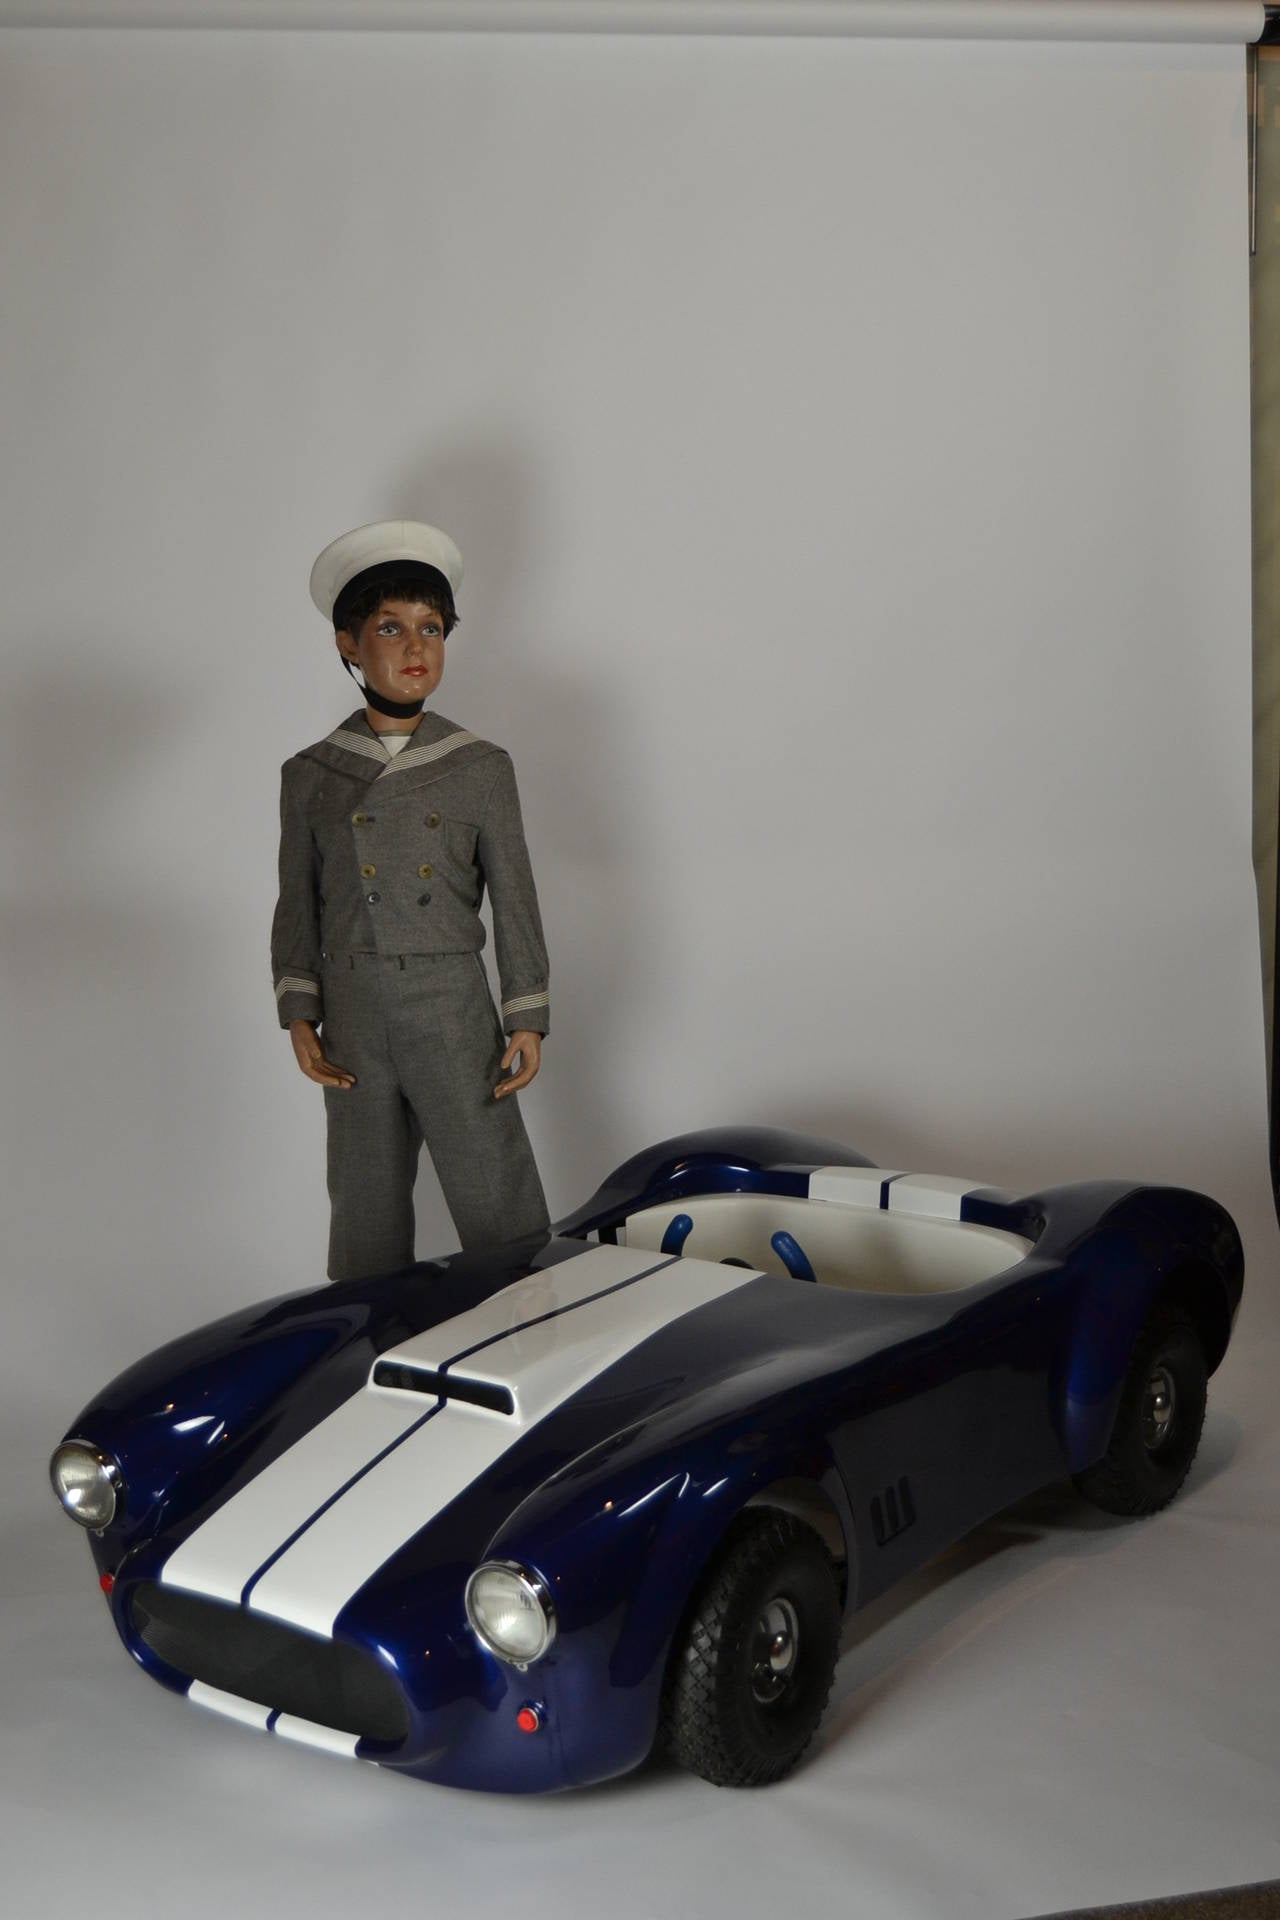 Awesome huge pedal car - type AC Cobra Shelby 1966 - Shelby American racing colours - racing blue with white stripes - vintage pedal car from the nineties - solid metal frame with fiberglass body